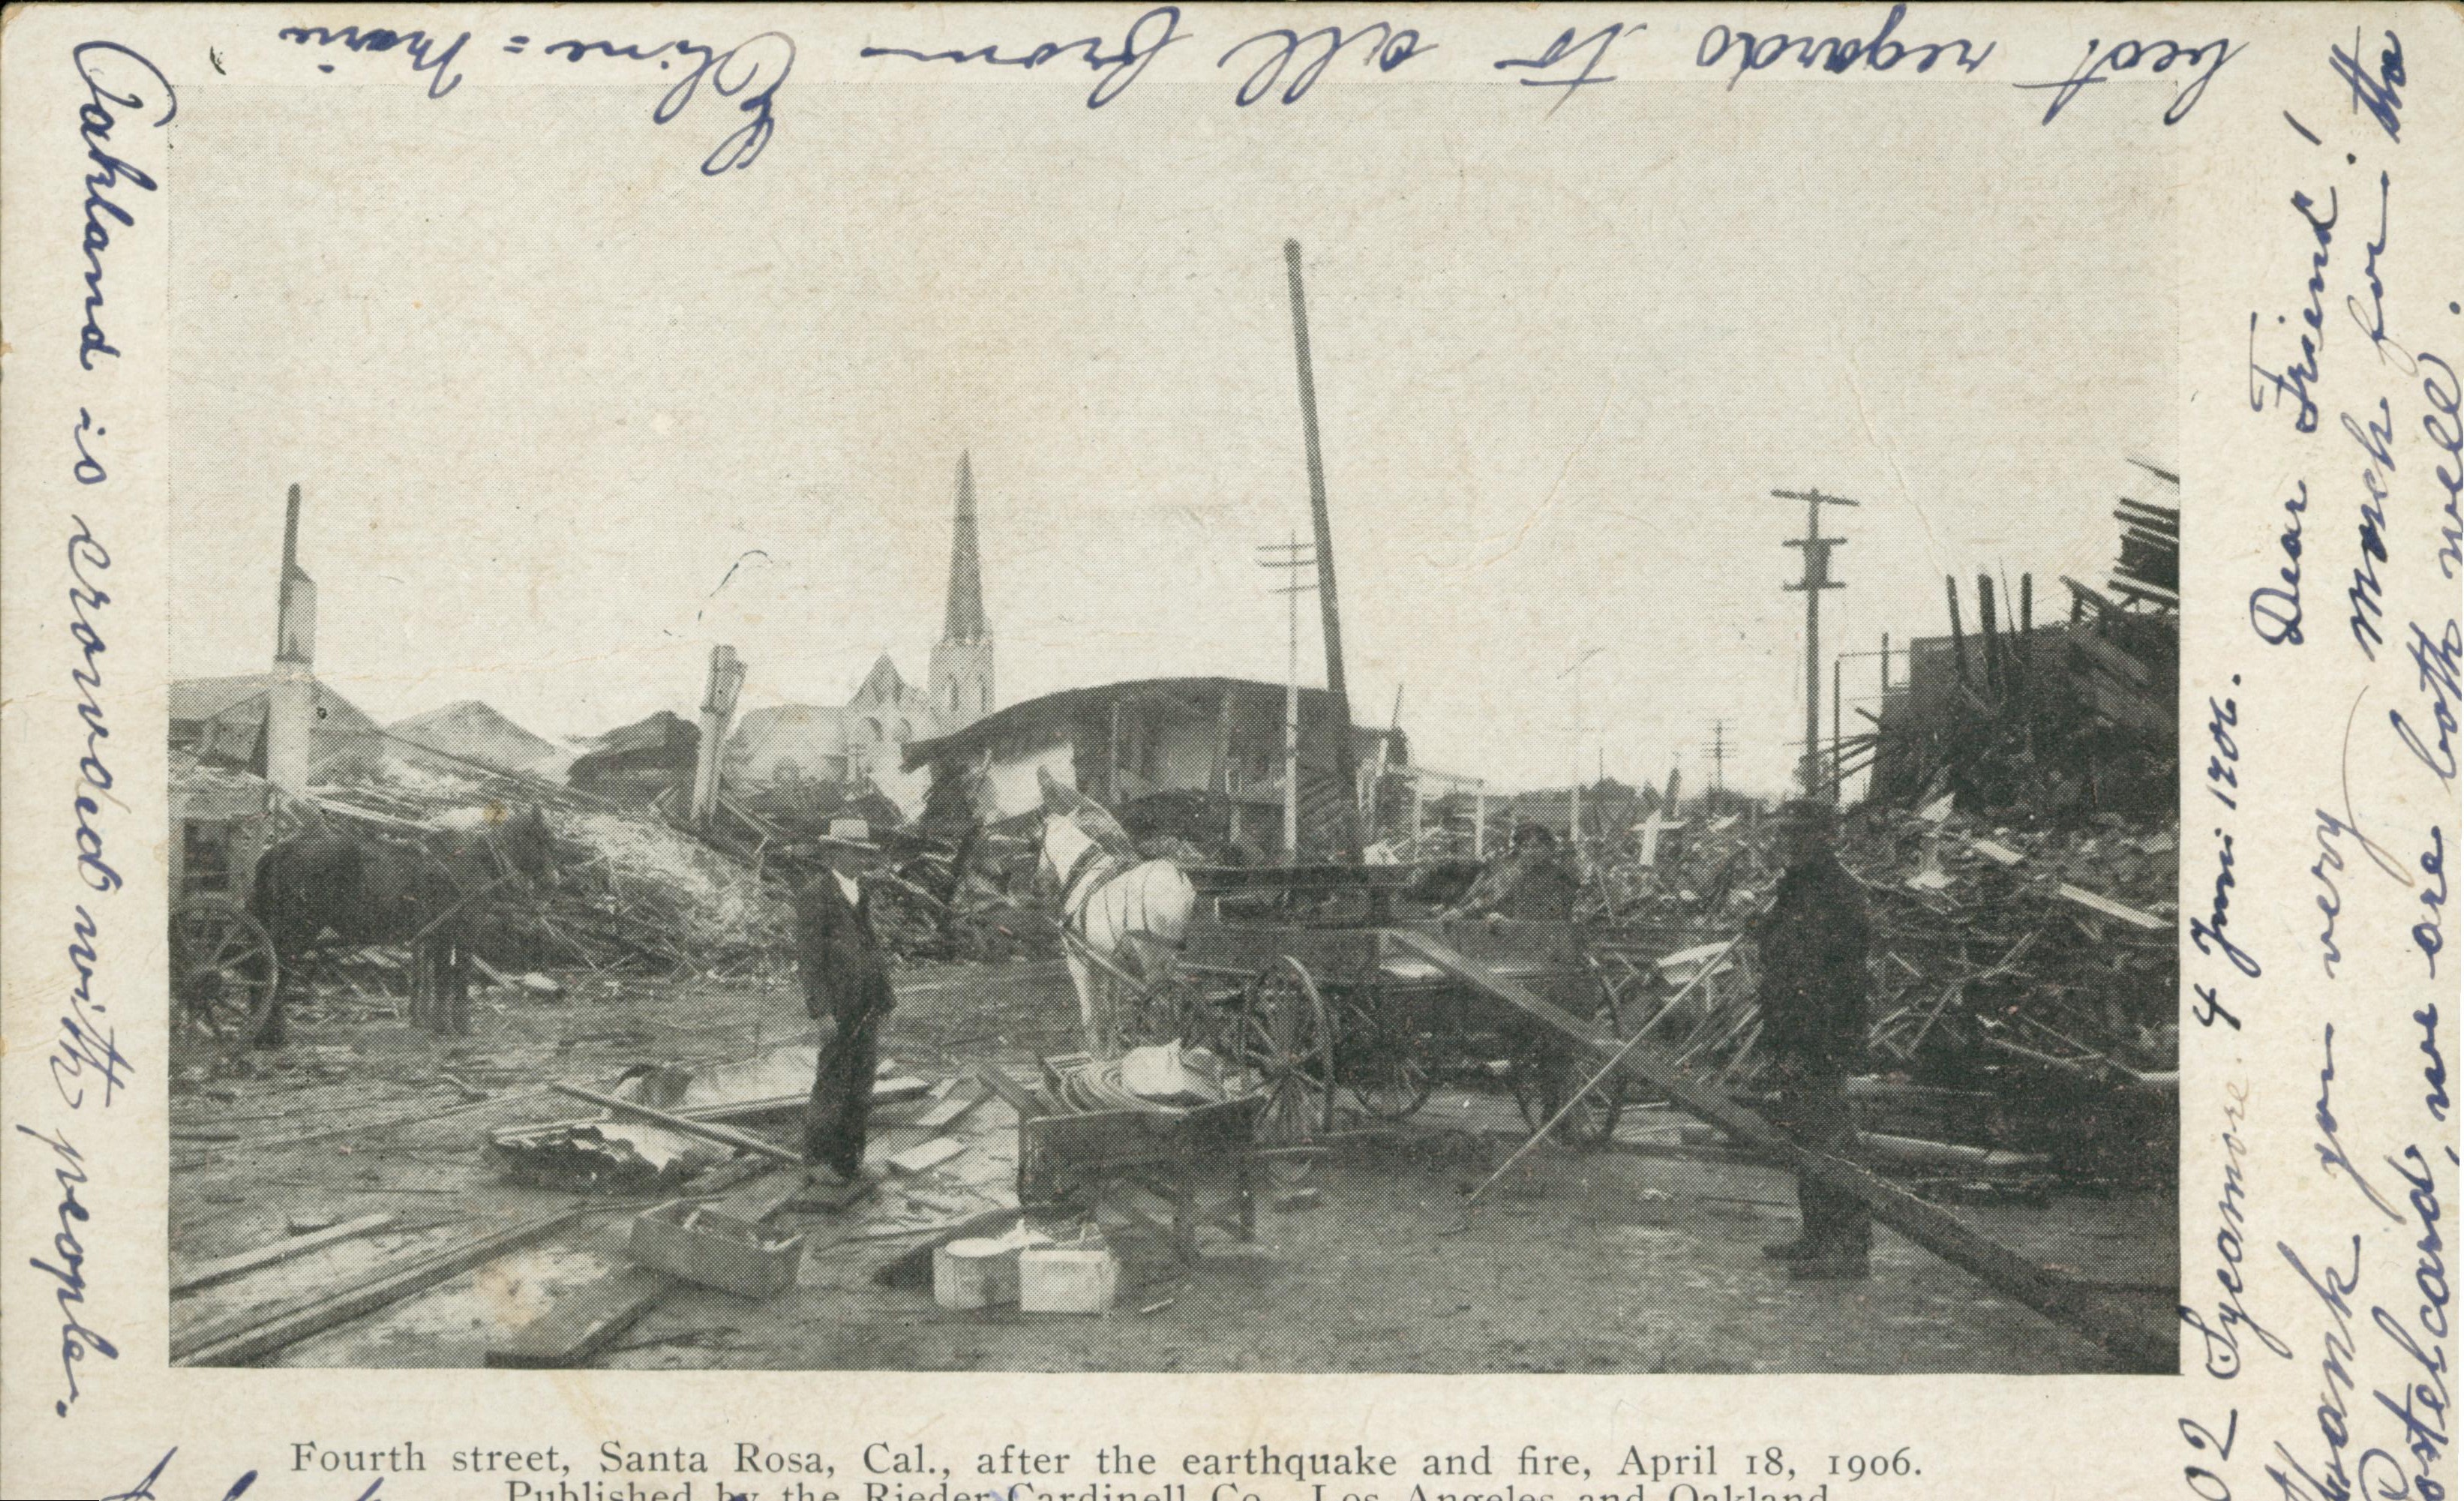 Shows the ruins of 4th street in Santa Rosa after the San Francisco Earthquake. Several men and carts are also in the scene.